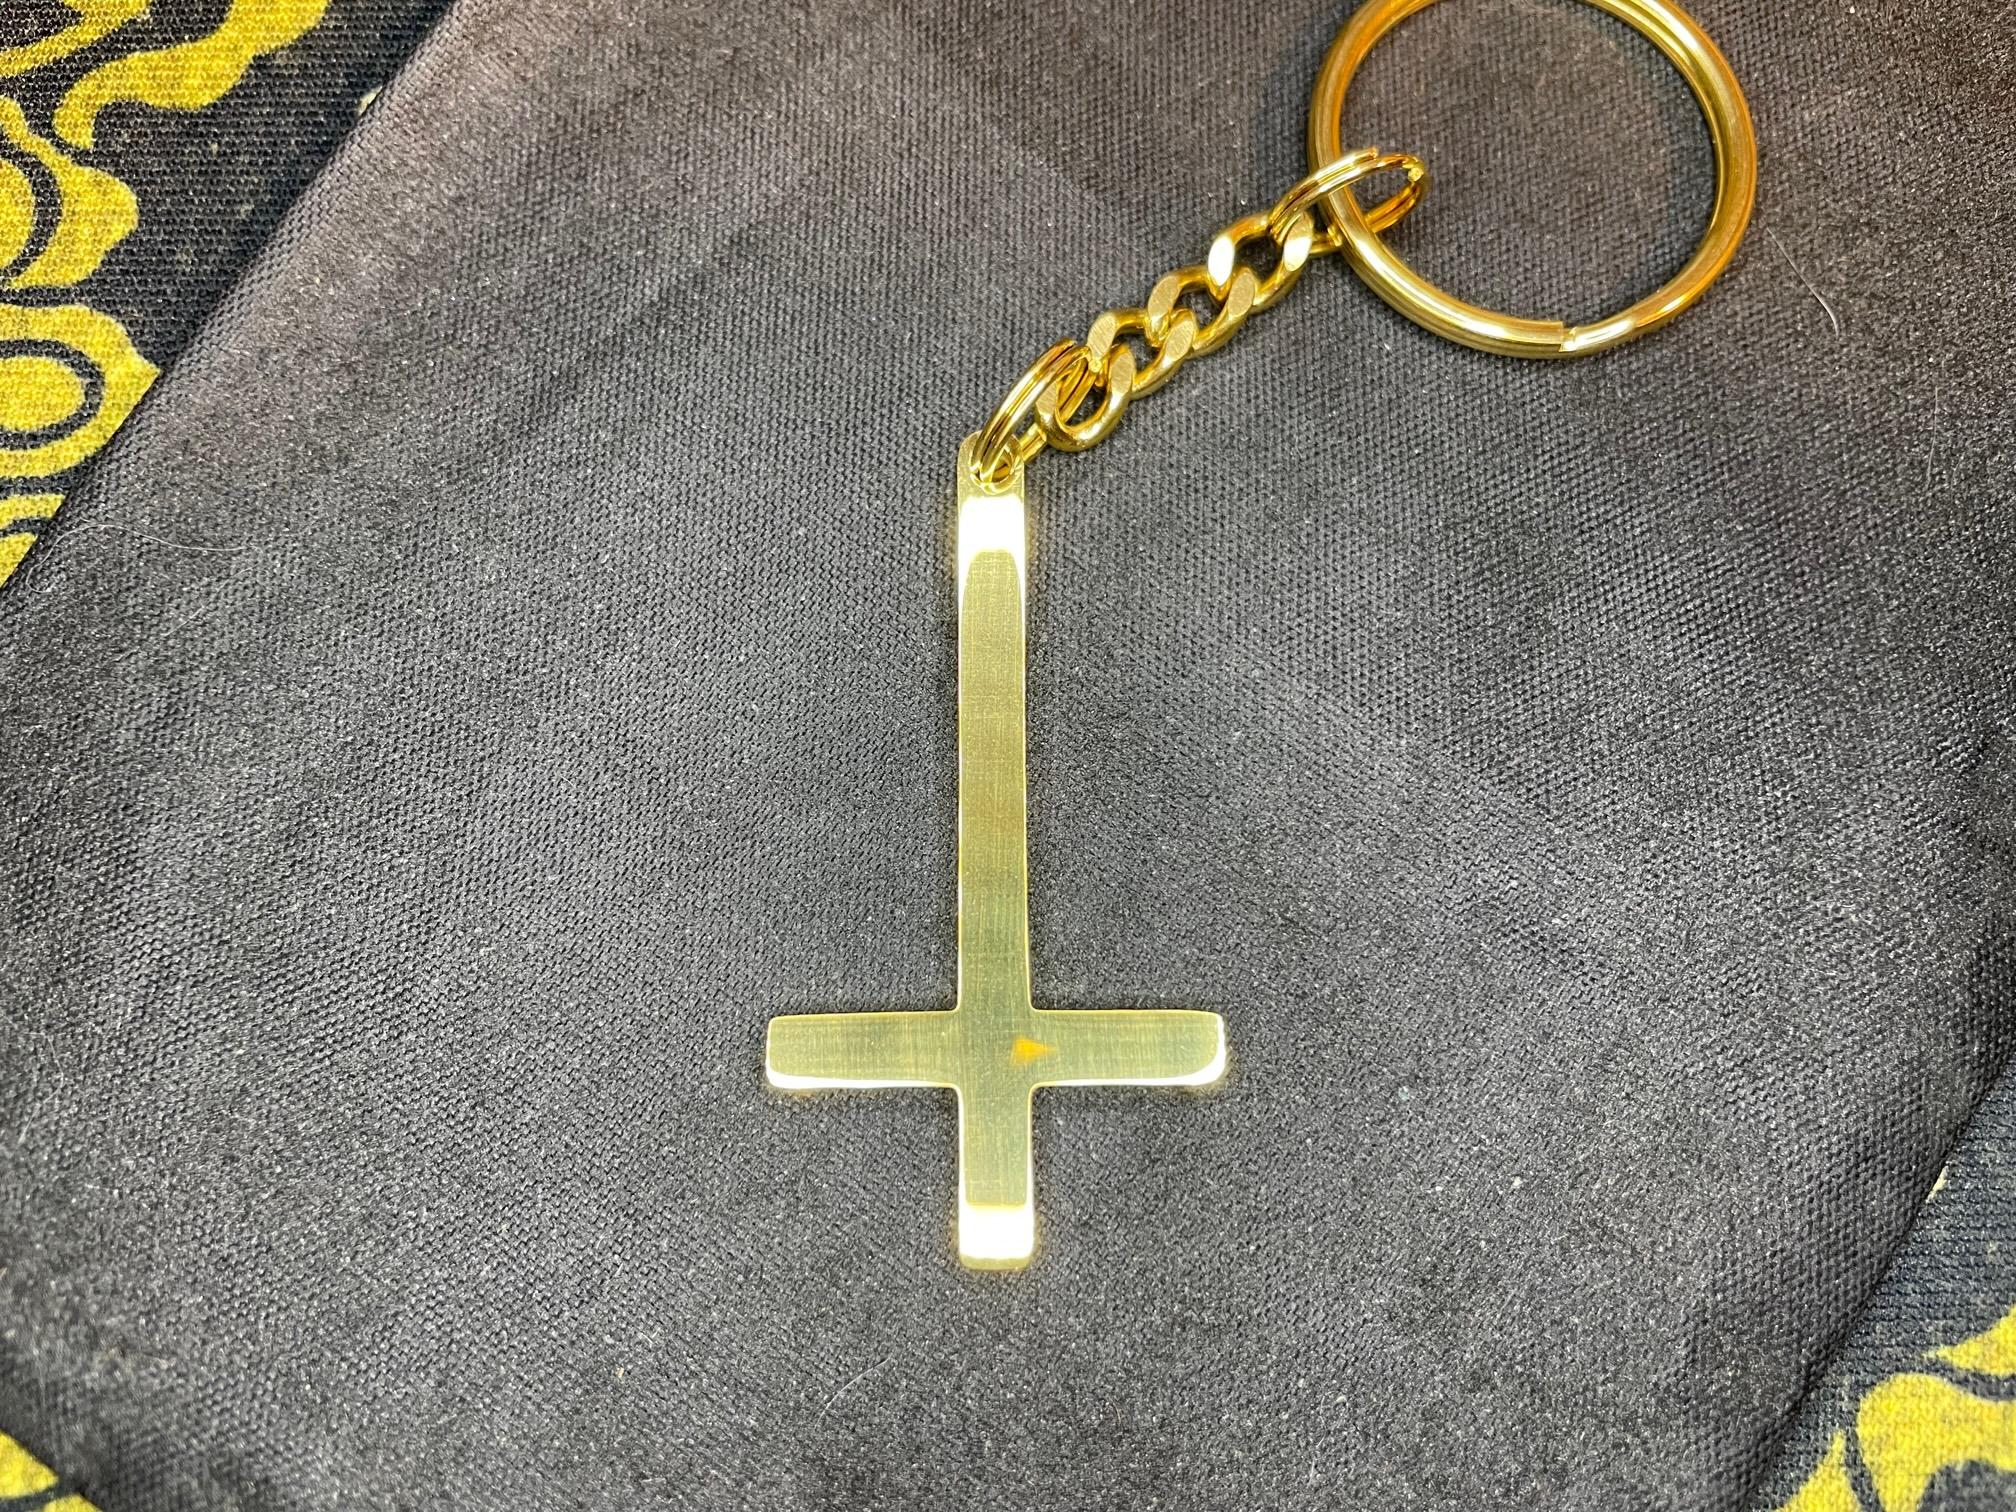 upside down inverted cross stainless steel pendant keychain gothic minimalist retro satanic wiccan occult darkness jewelry gold